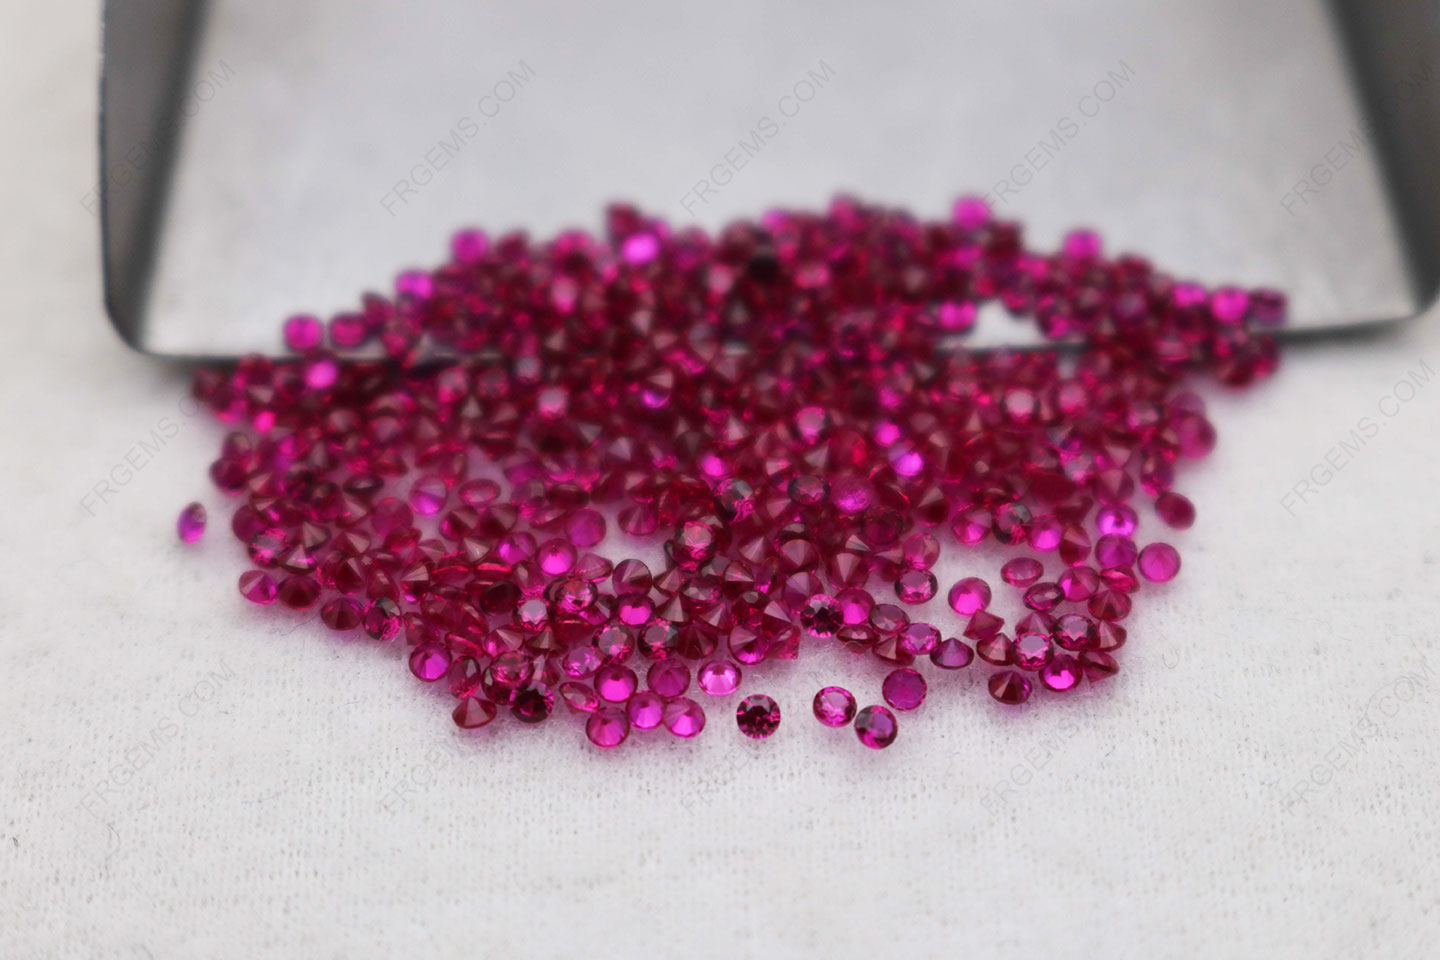 Loose Corundum Ruby Red #8 Melee small Round Shape Faceted Cut 1.50mm Gemstones